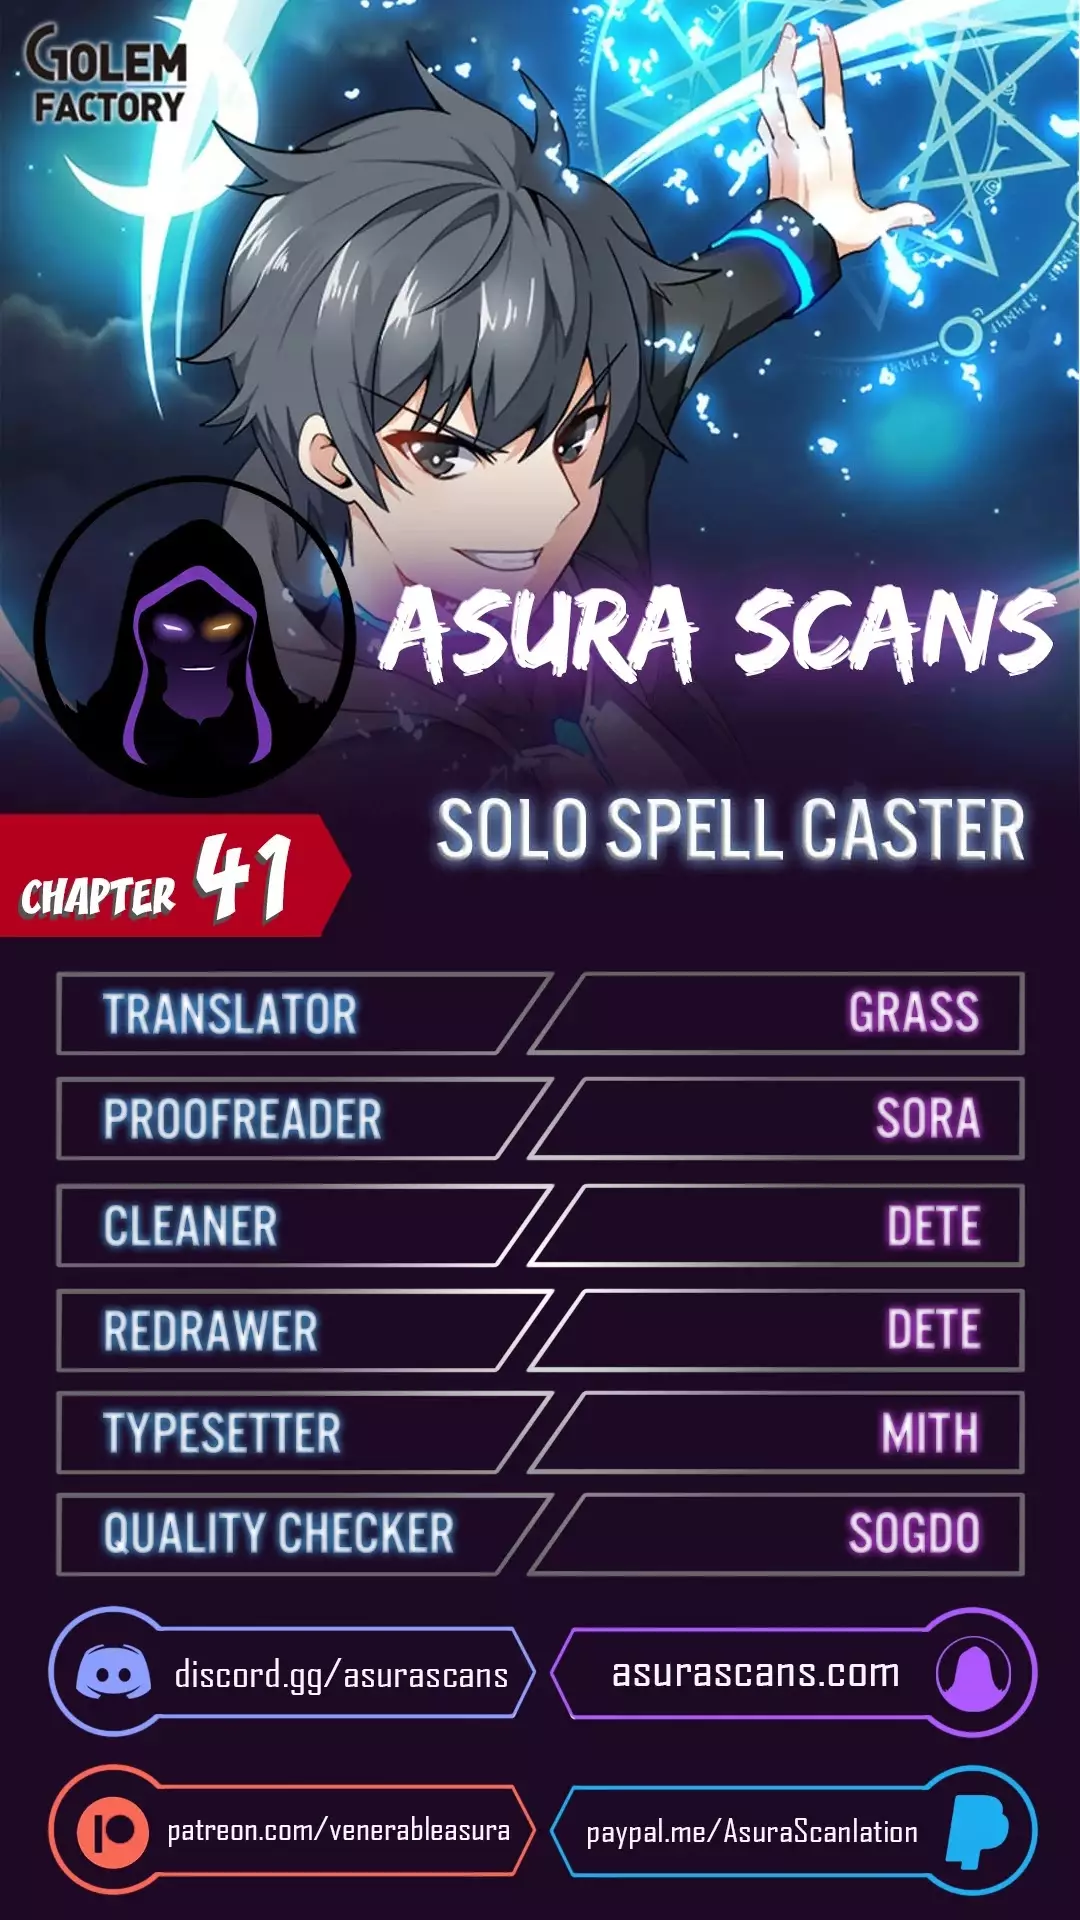 Solo Spell Caster - 41 page 1